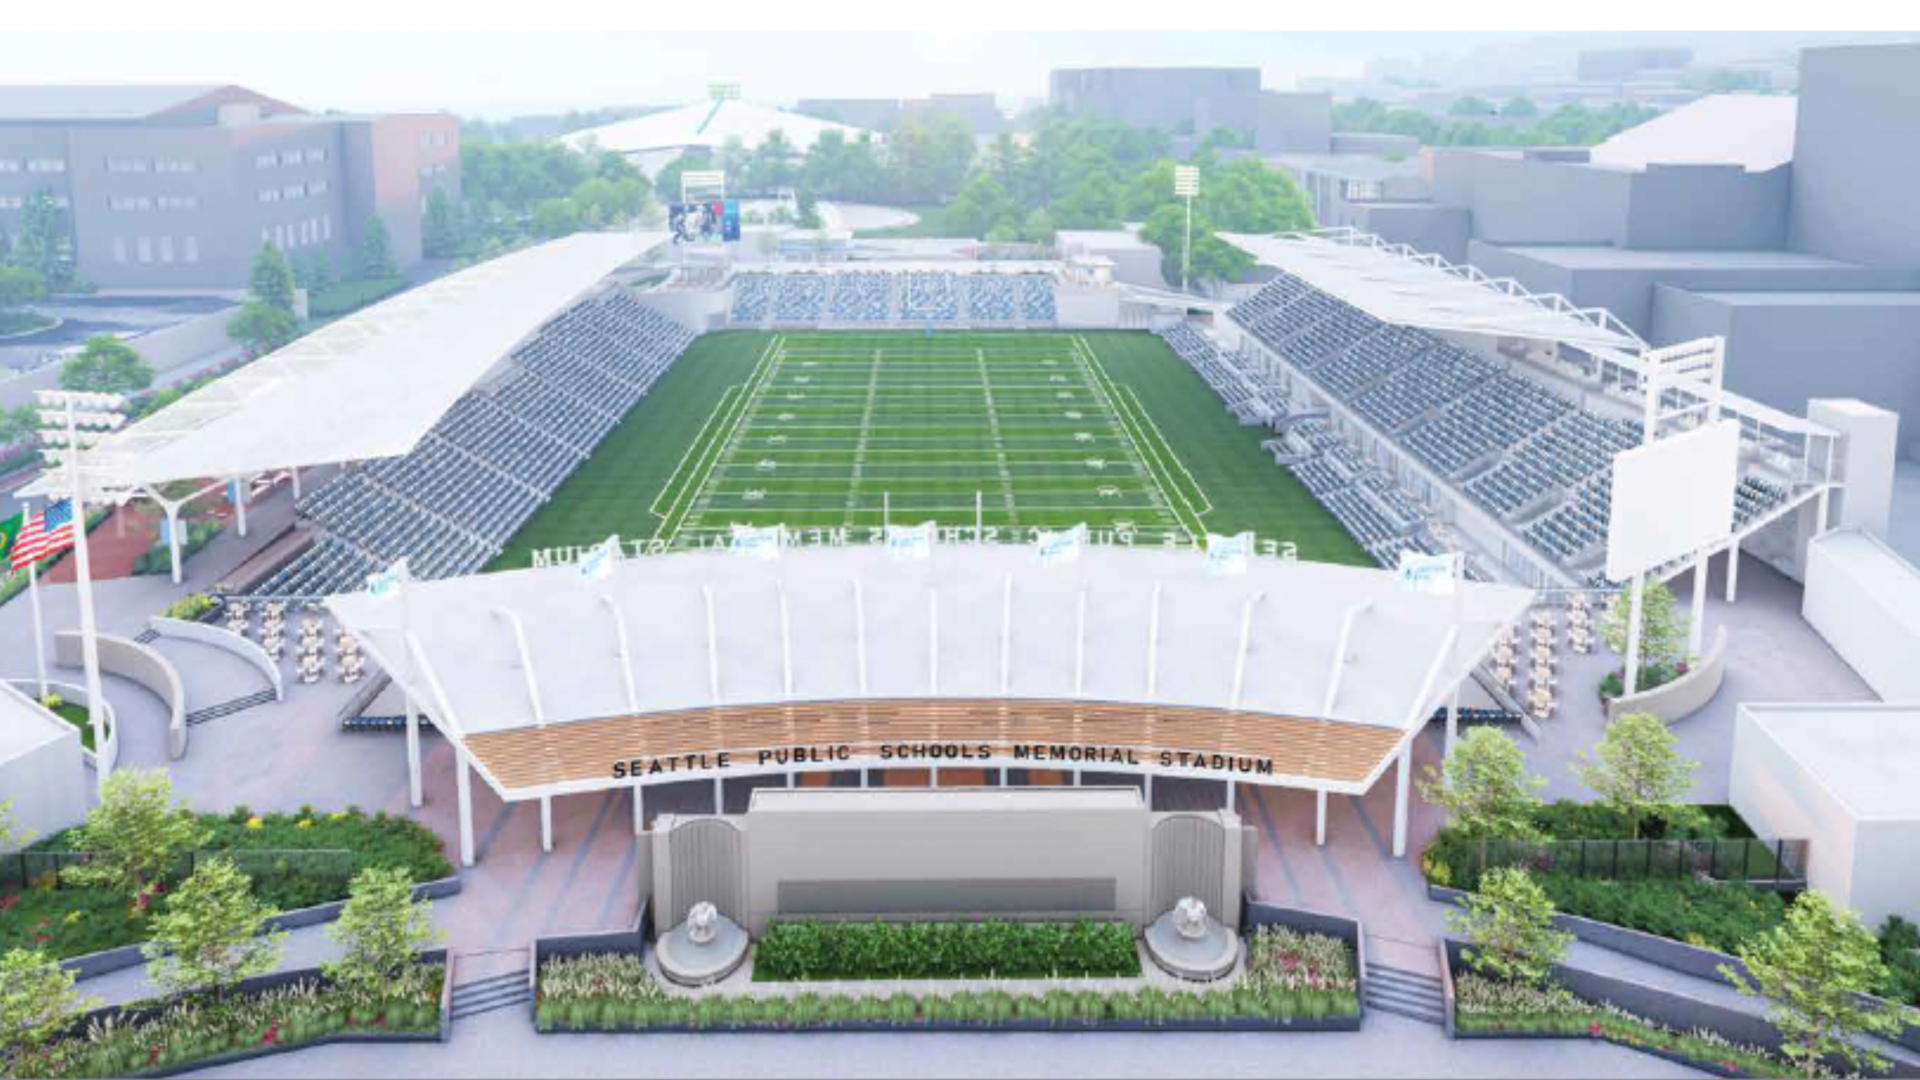 A rendering of a renovated Memorial Stadium with covered bleacher seating and wide open green field.